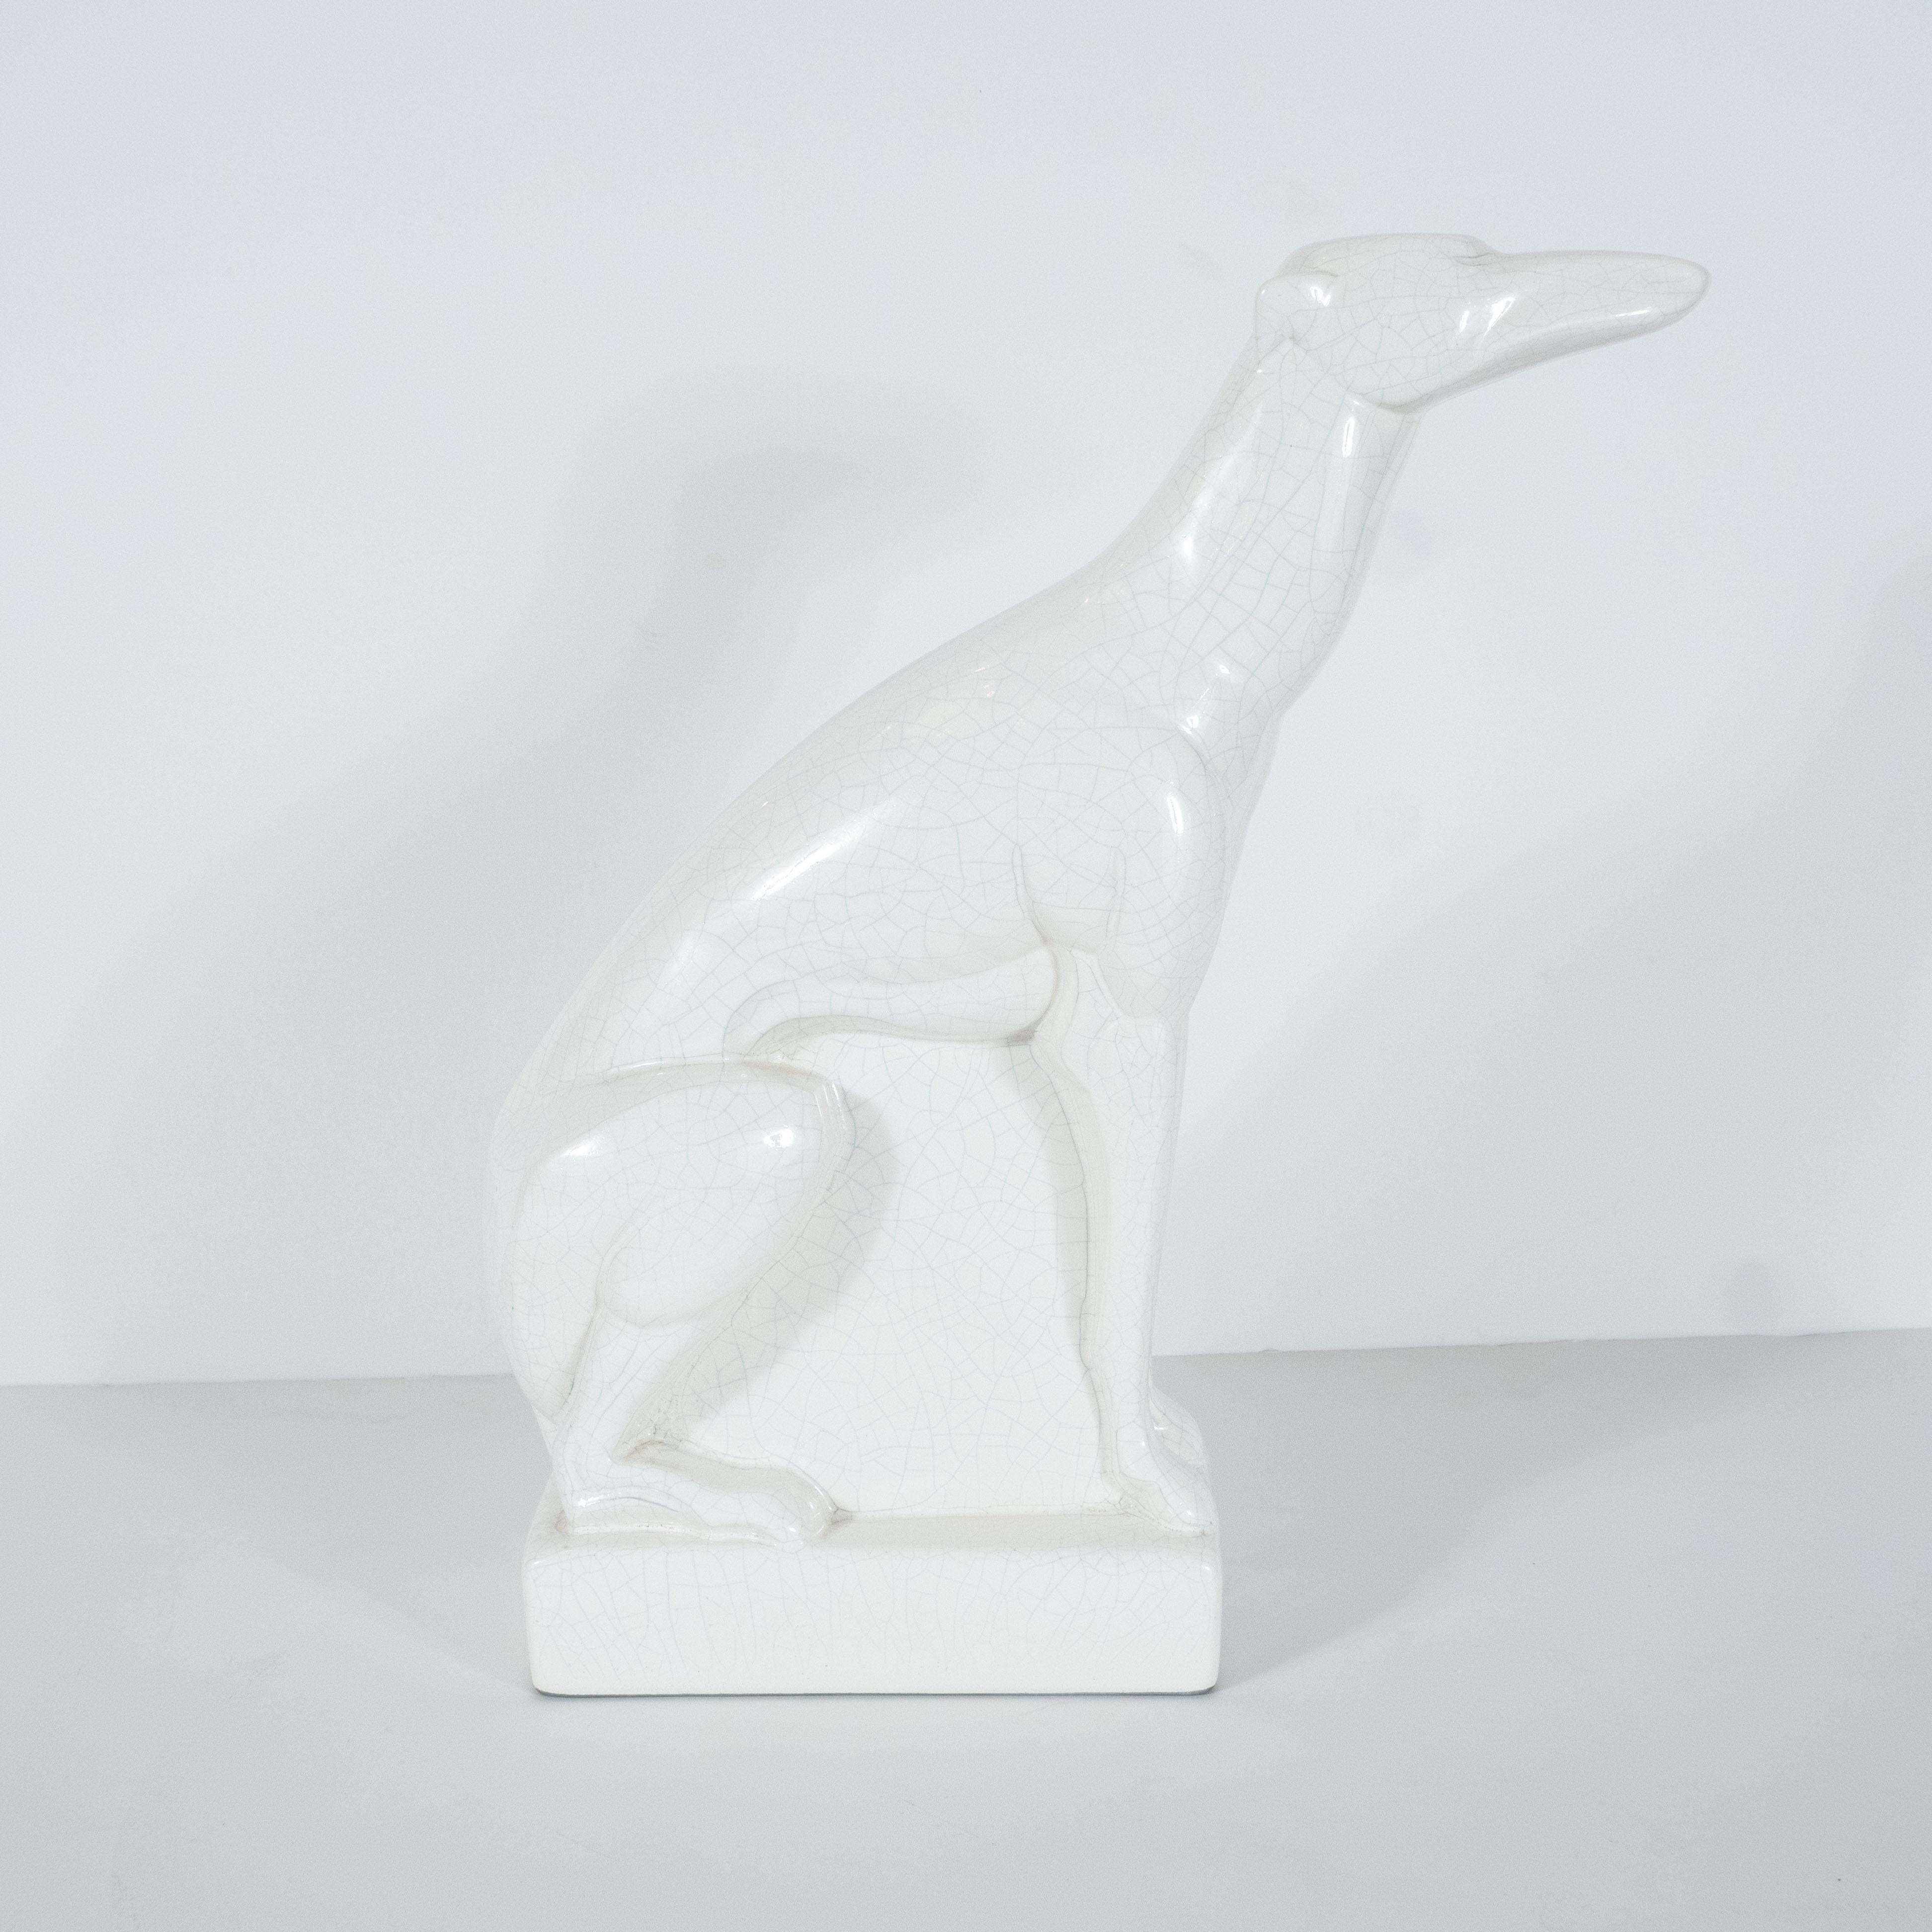 Mid-20th Century French Art Deco Craqueleur White Ceramic Greyhound Signed by Charles Lemanceau For Sale